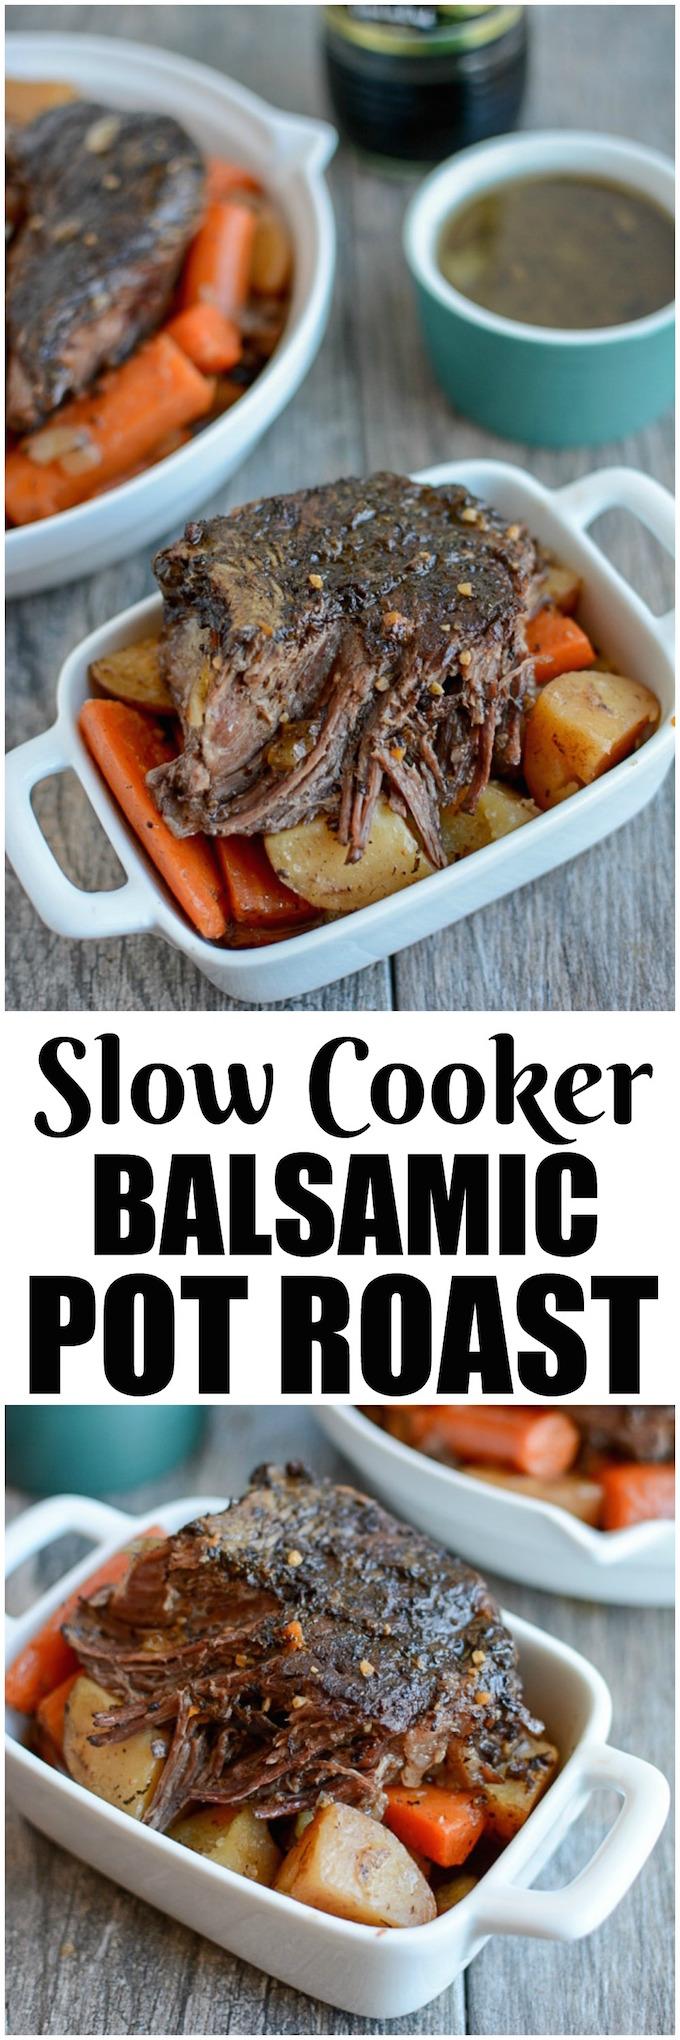 This Slow Cooker Balsamic Pot Roast is an easy, healthy dinner option for a busy night. Beef, potatoes and carrots cook all day for a balanced meal that's ready when you walk in the door.